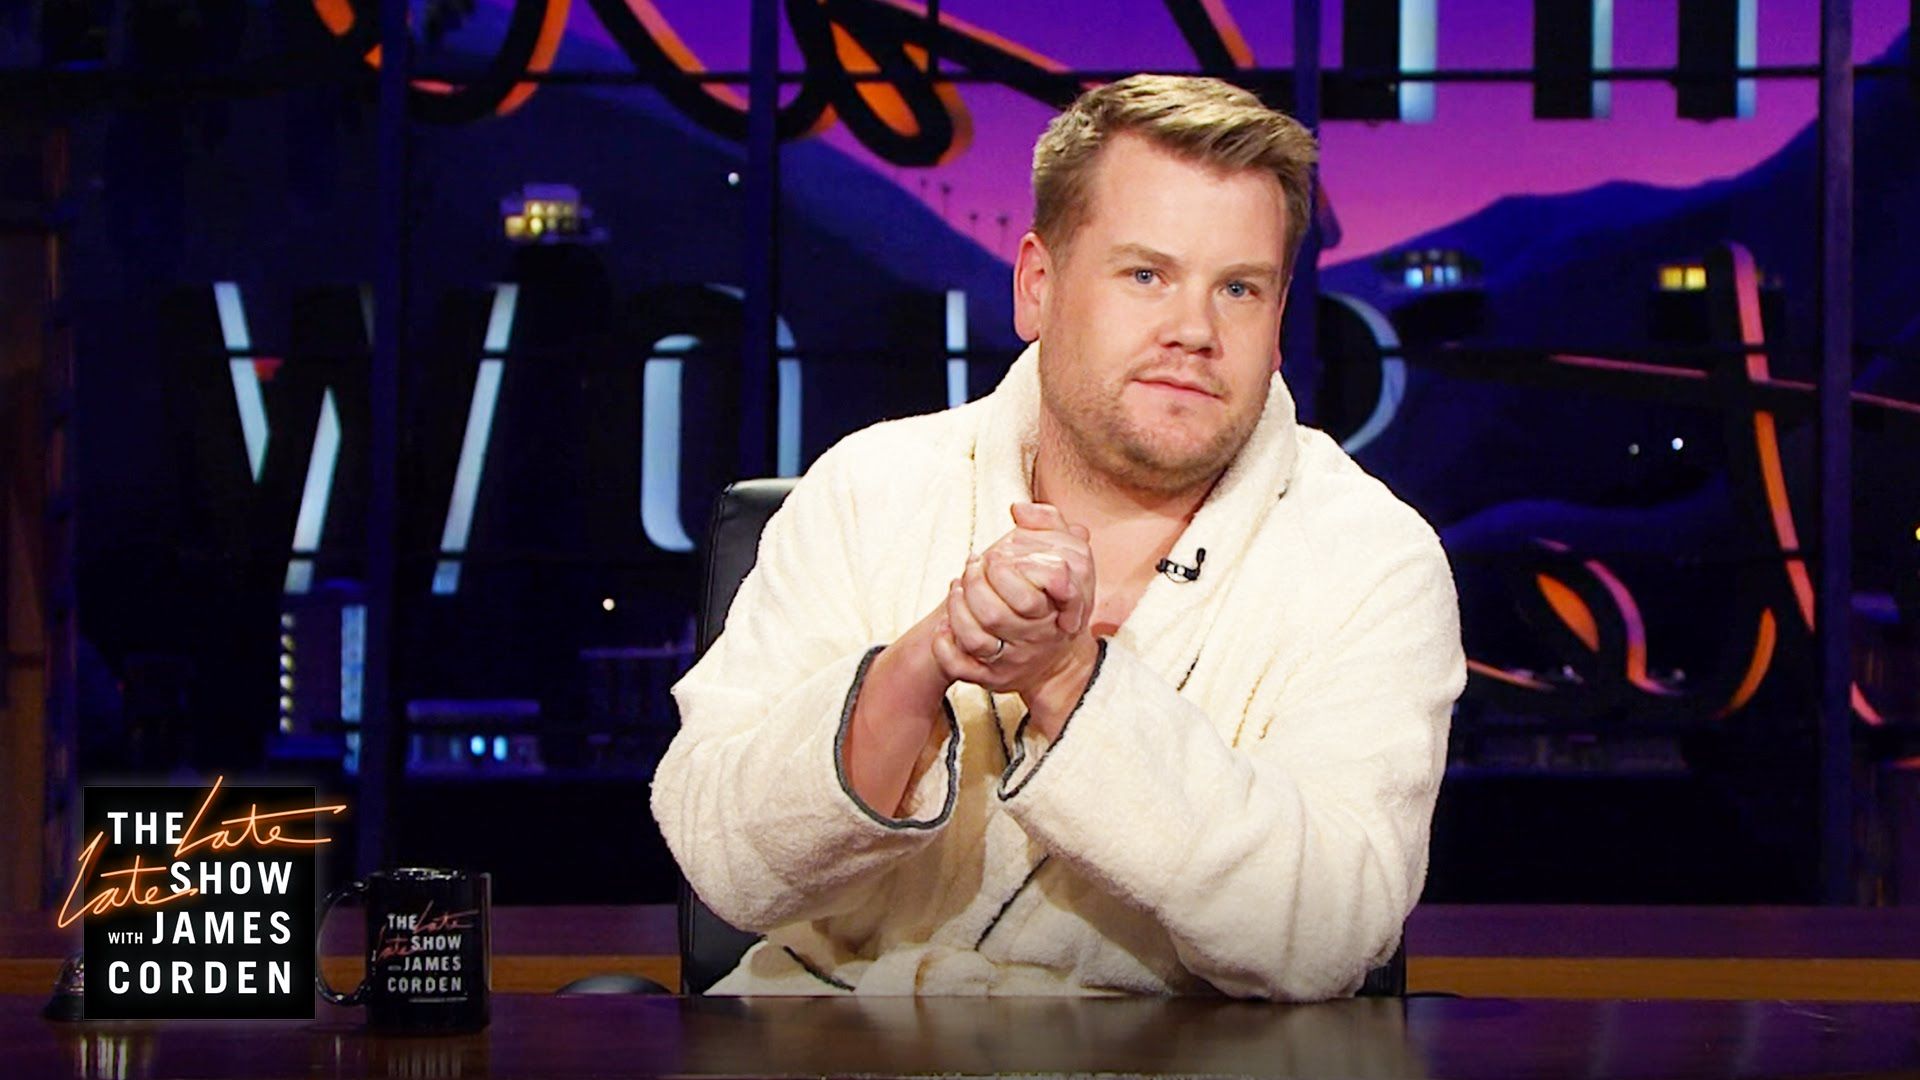 The late show with James Corden